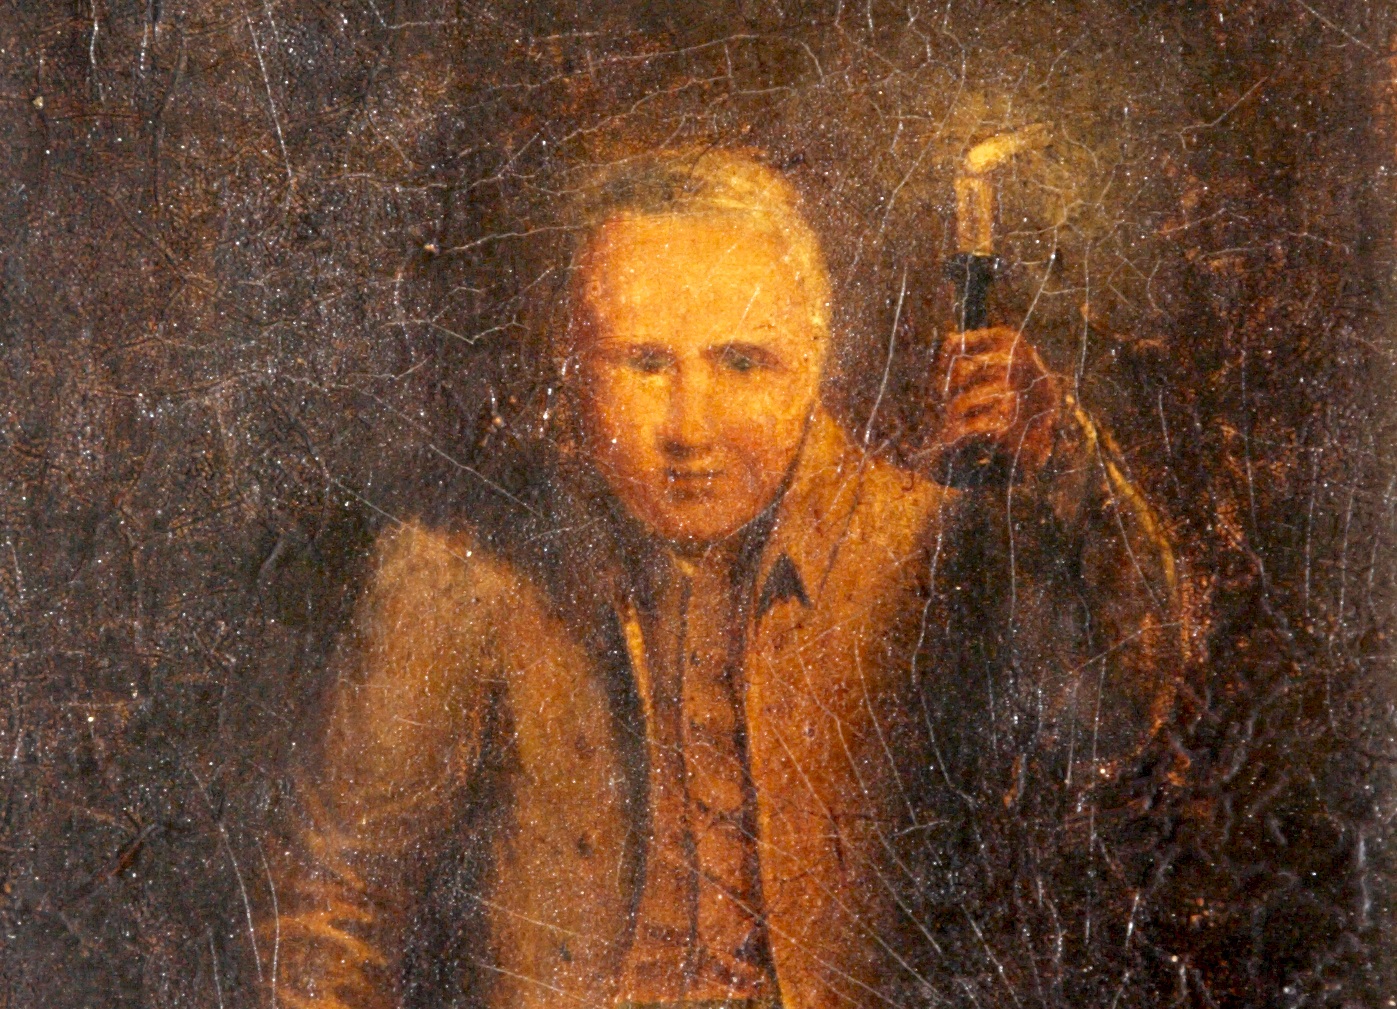 A painting of a man in a waistcoat holding a candle on a candlestick up. The image is quite dark but the man's face is illuminated.